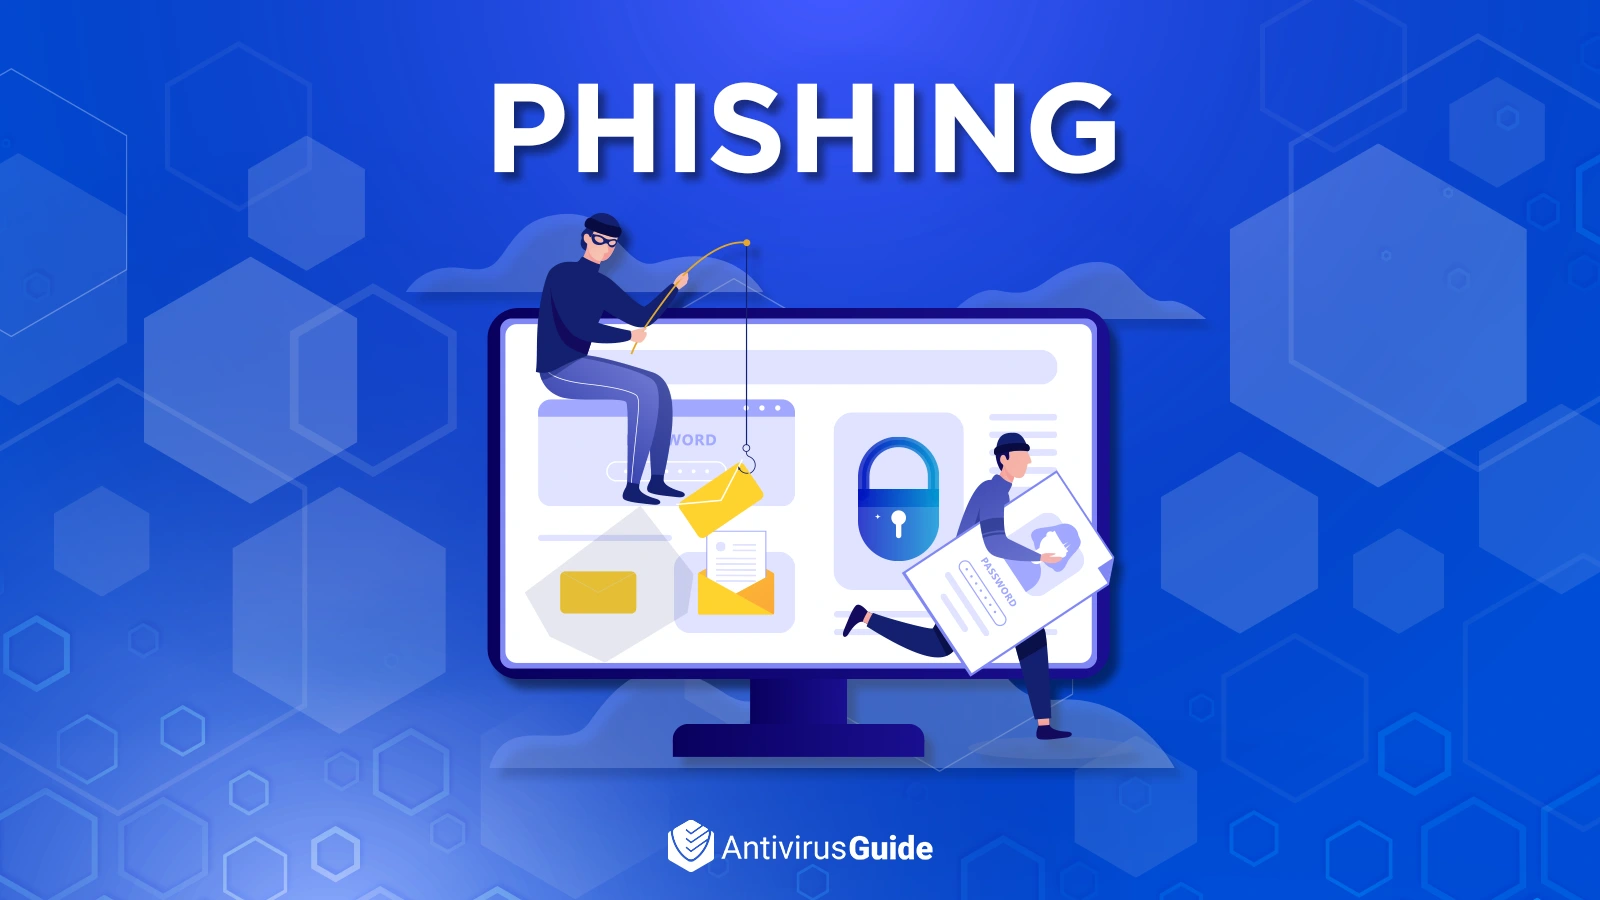 What Is Phishing and How Do I Avoid It?